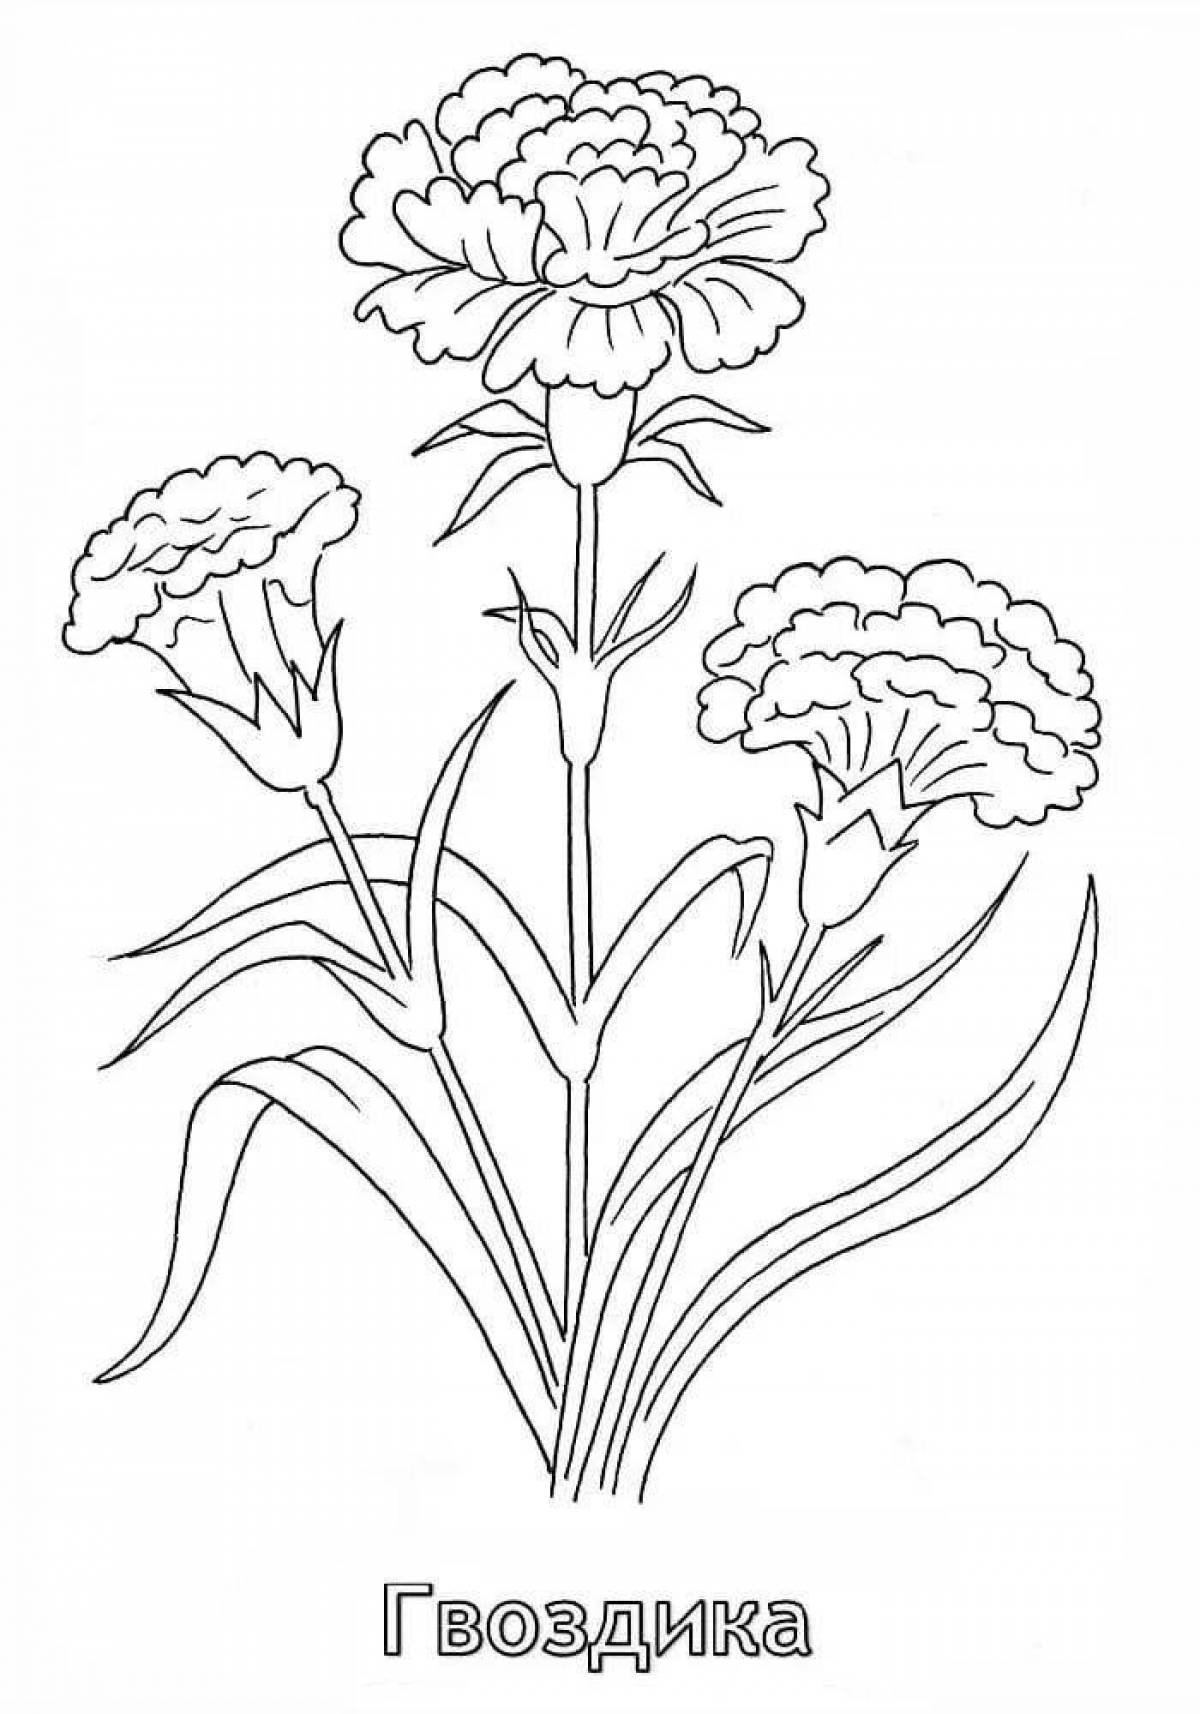 Delicate coloring of carnation flowers